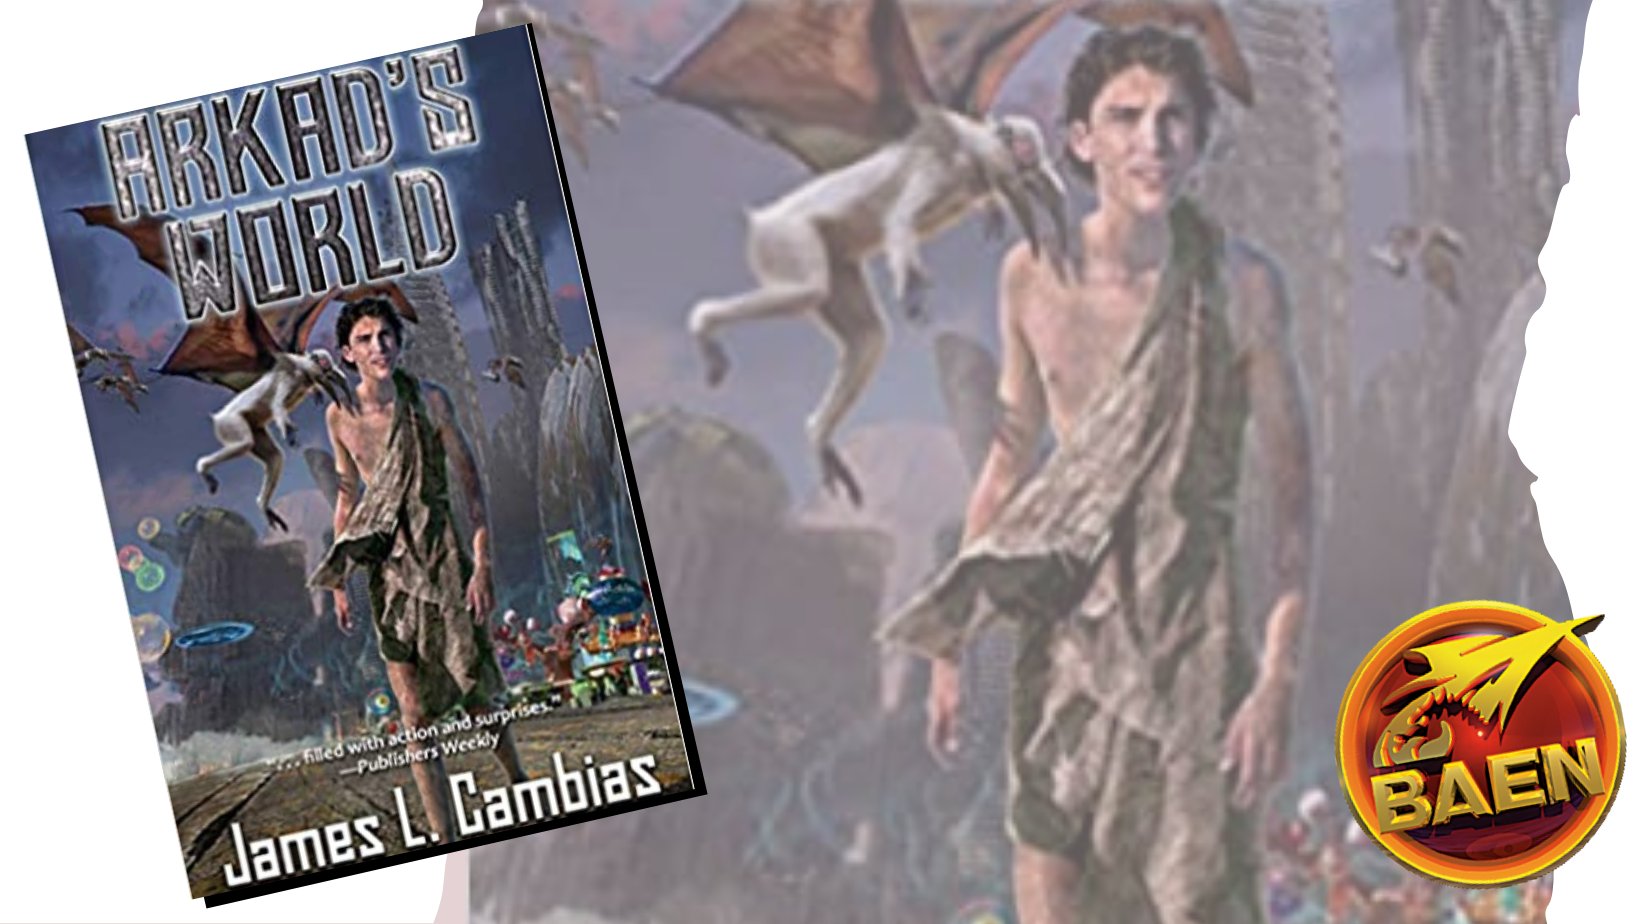 Arkad's World by James L Cambias